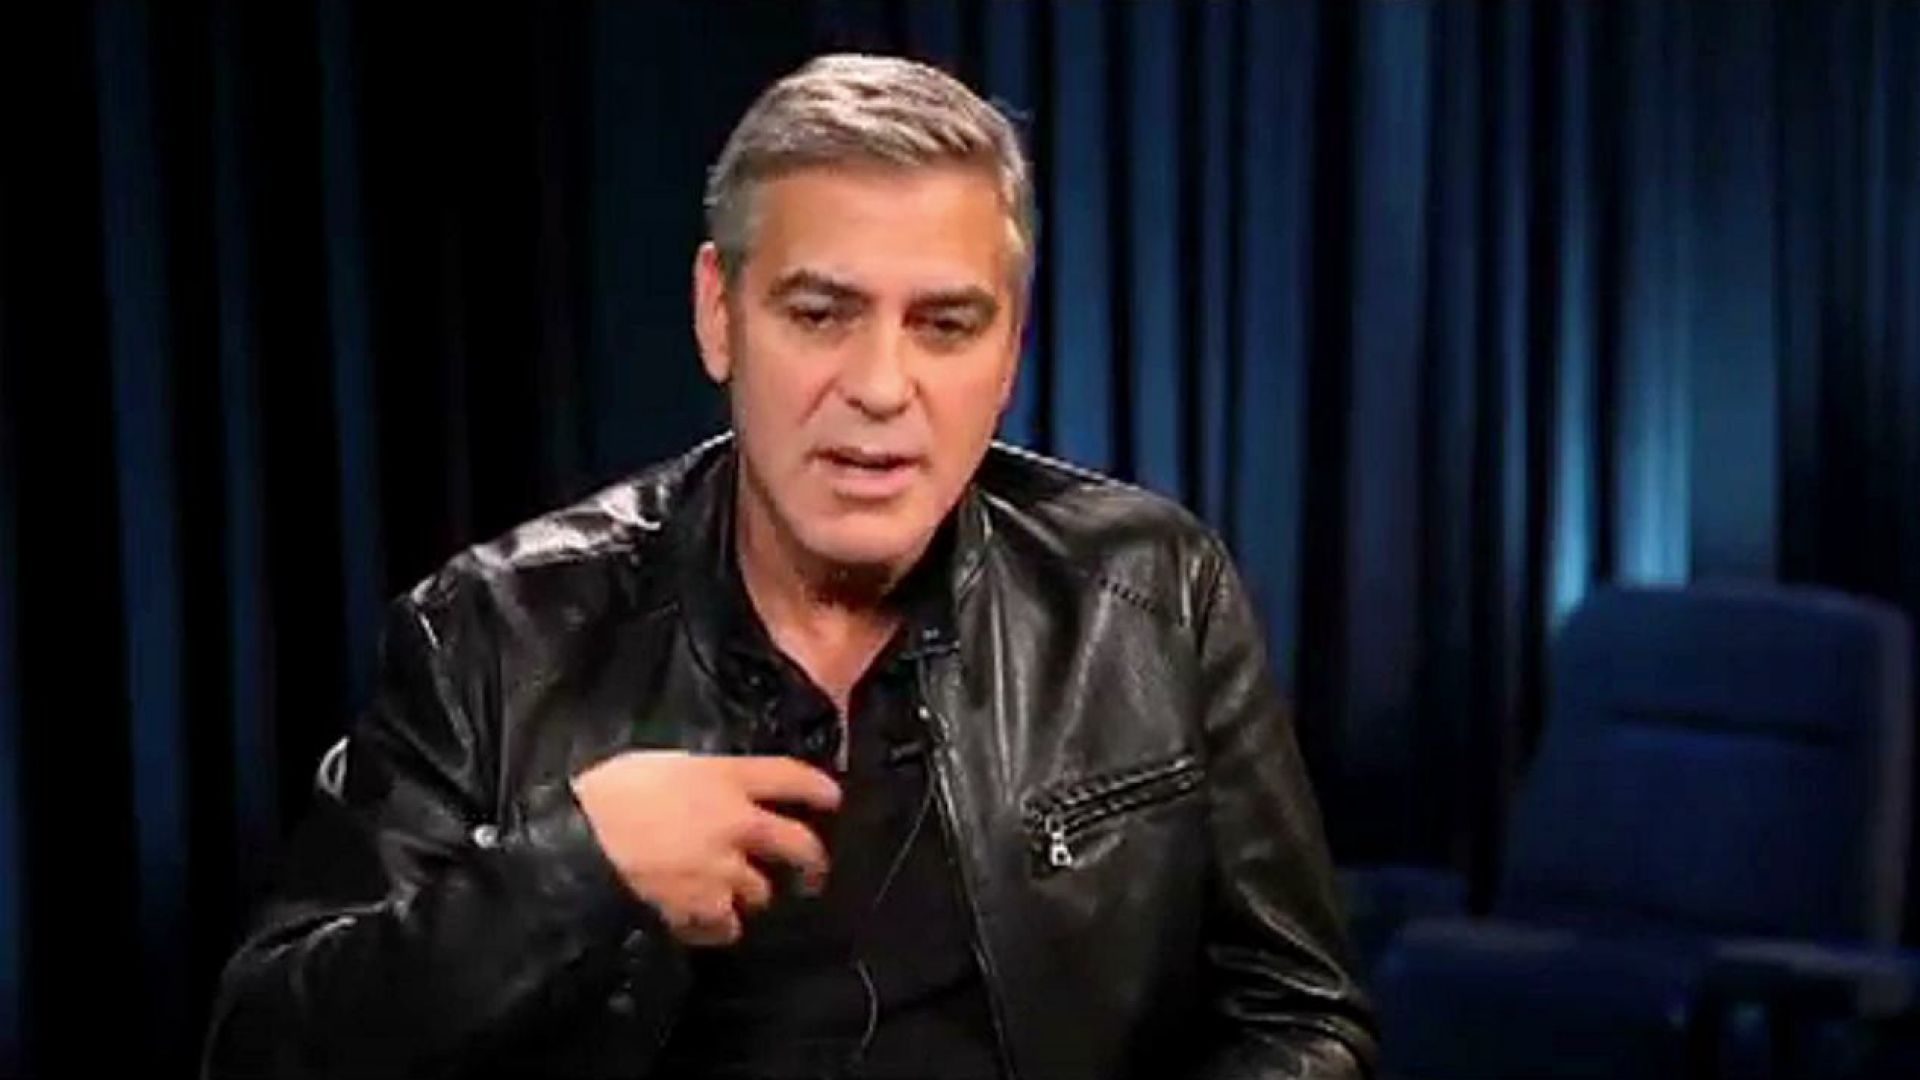 George Clooney and Alexander Payne talk about forgiving oneself. The Descendants